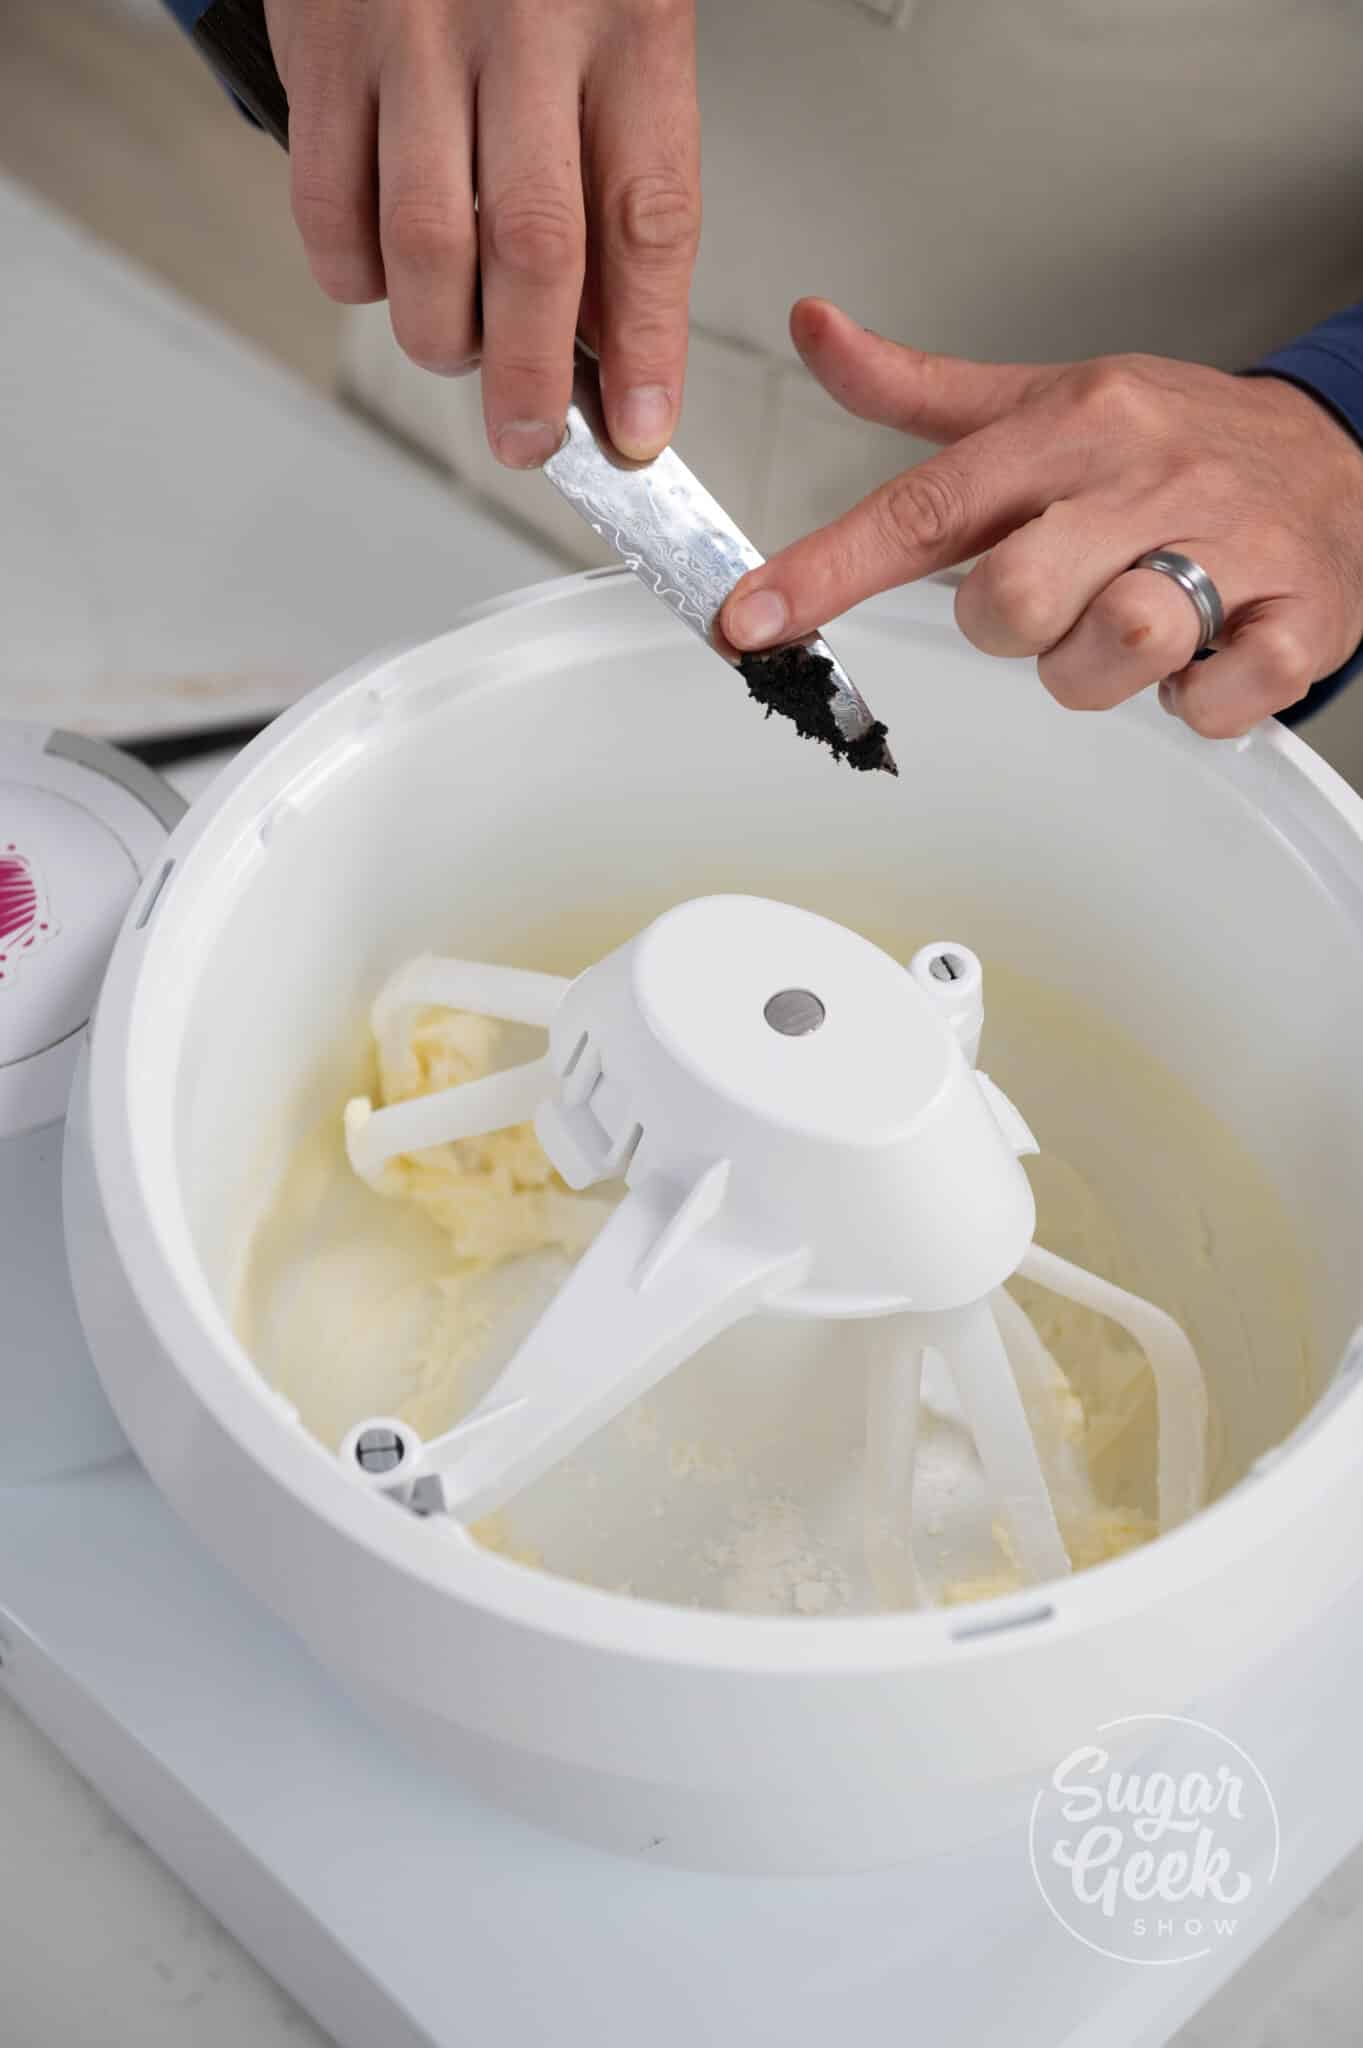 hands holding a knife covered in vanilla to scrape and add vanilla to the bowl.